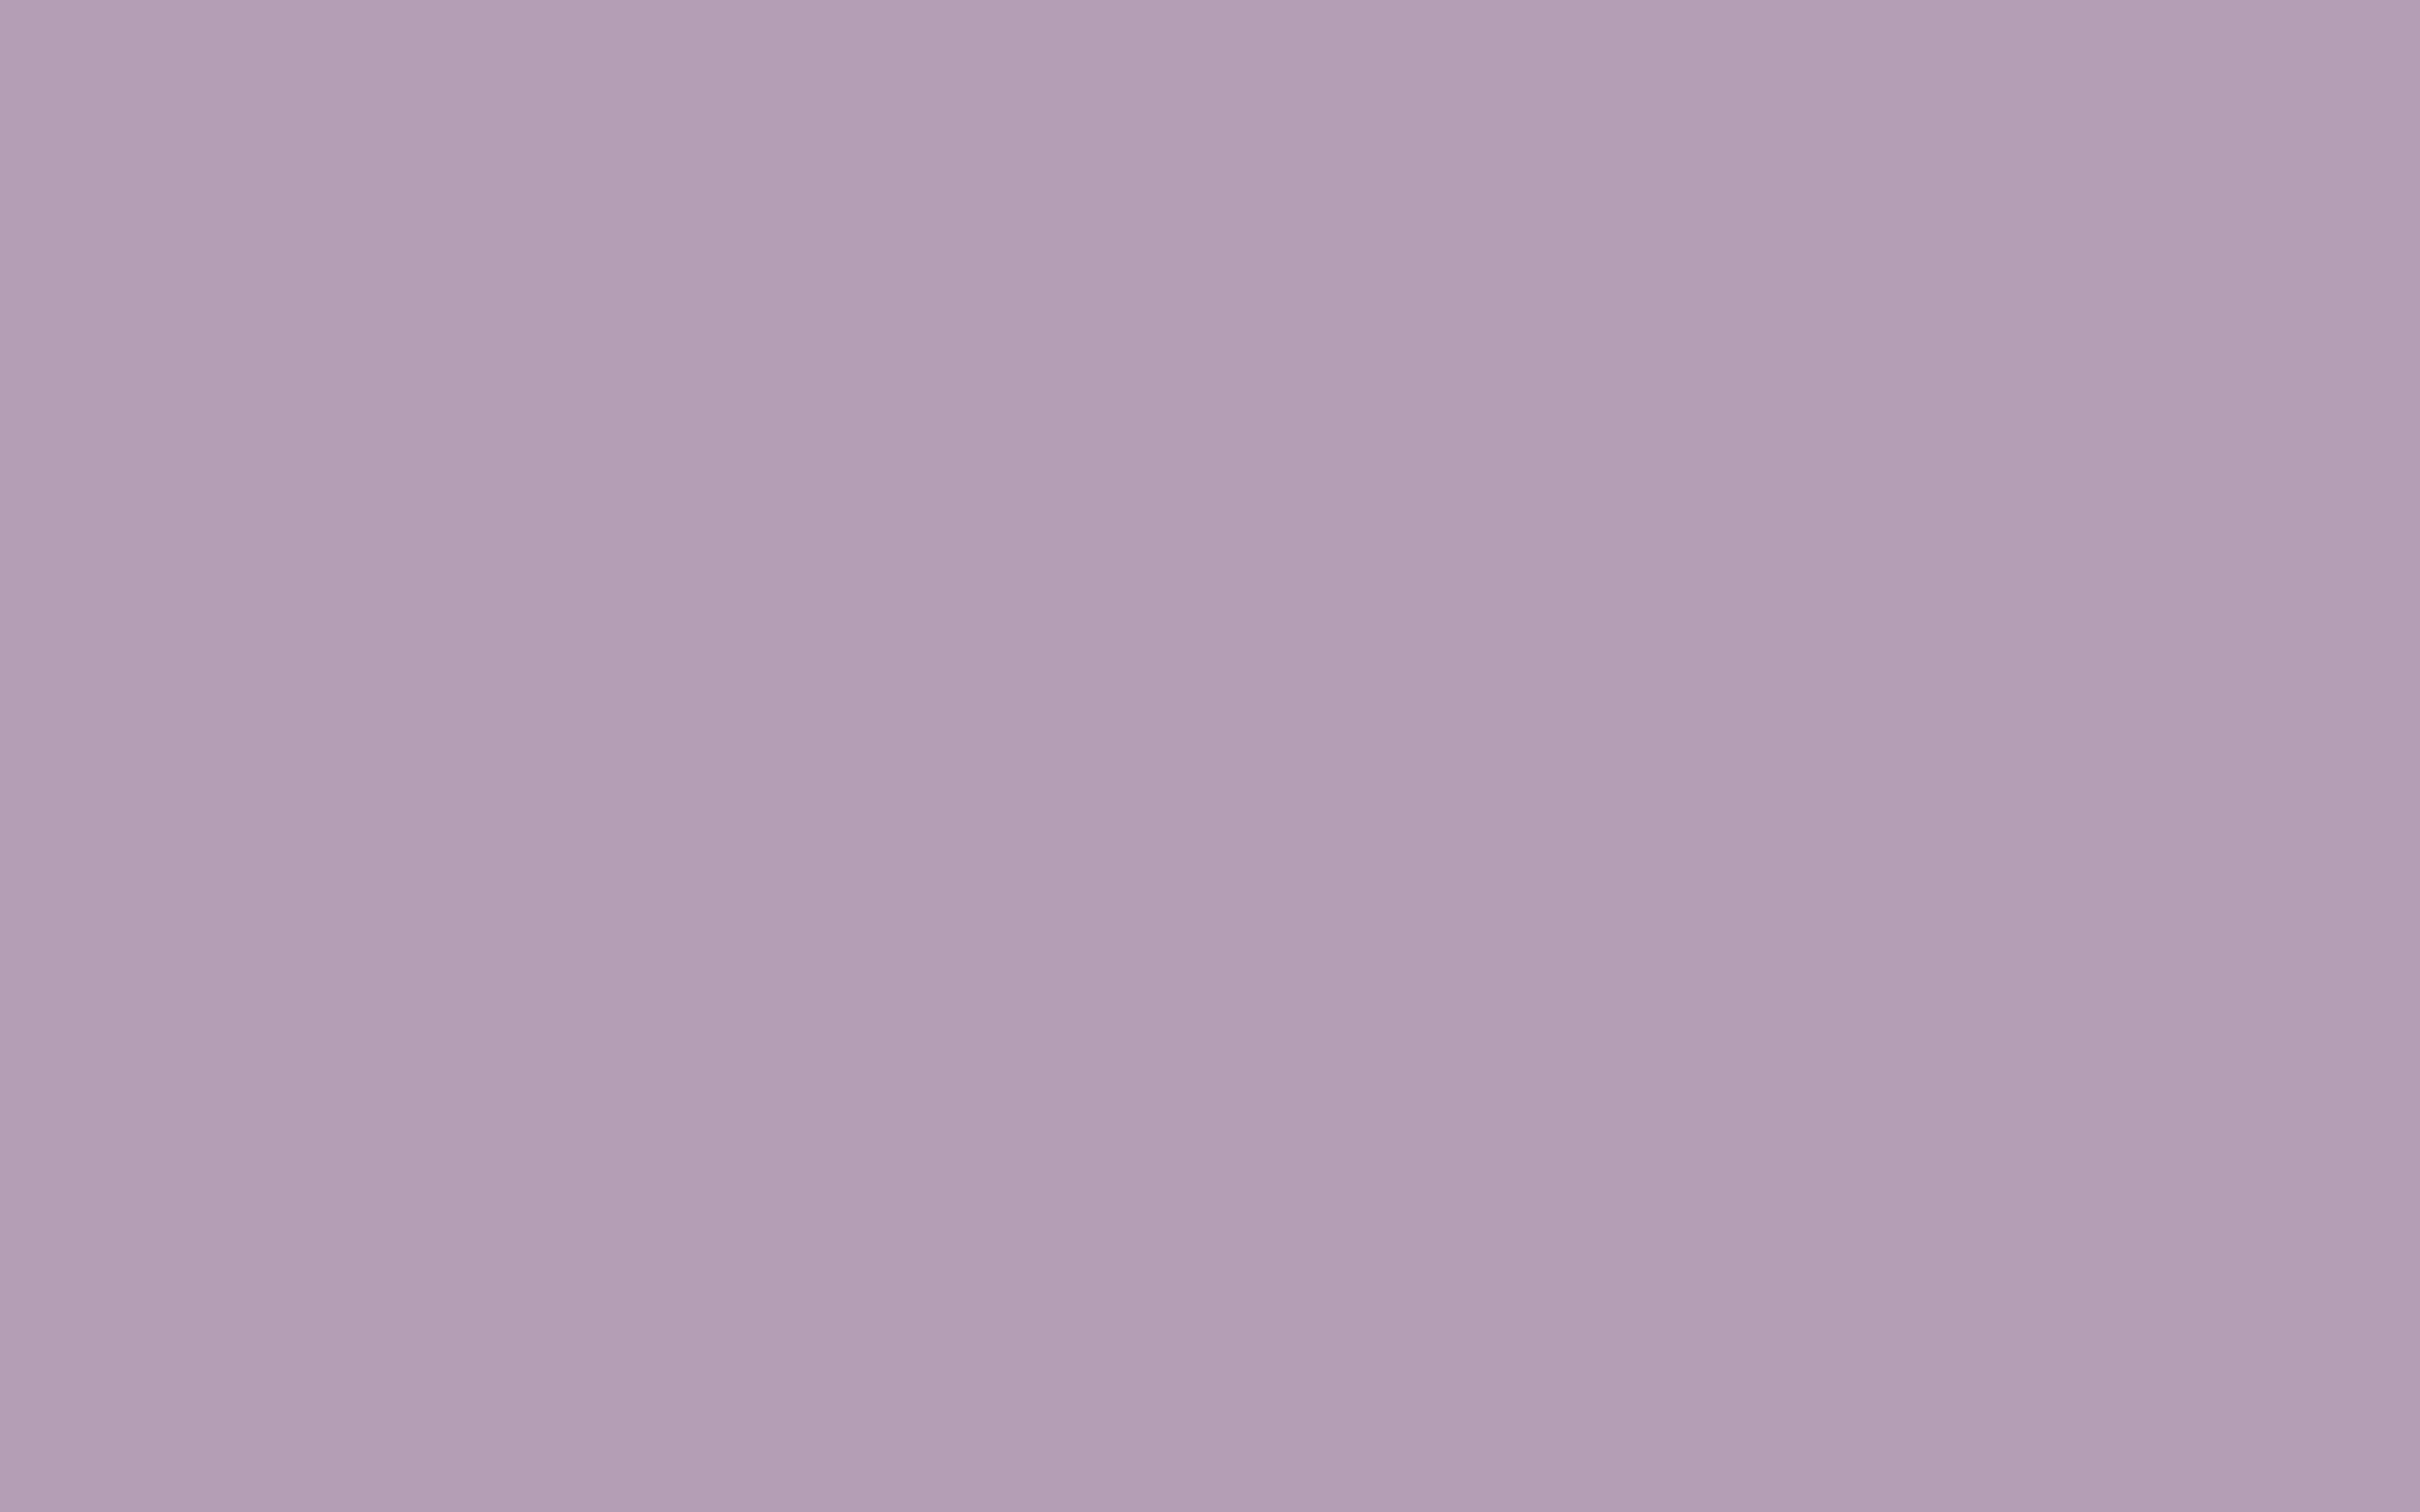 Free 2560x1600 resolution Pastel Purple solid color background view